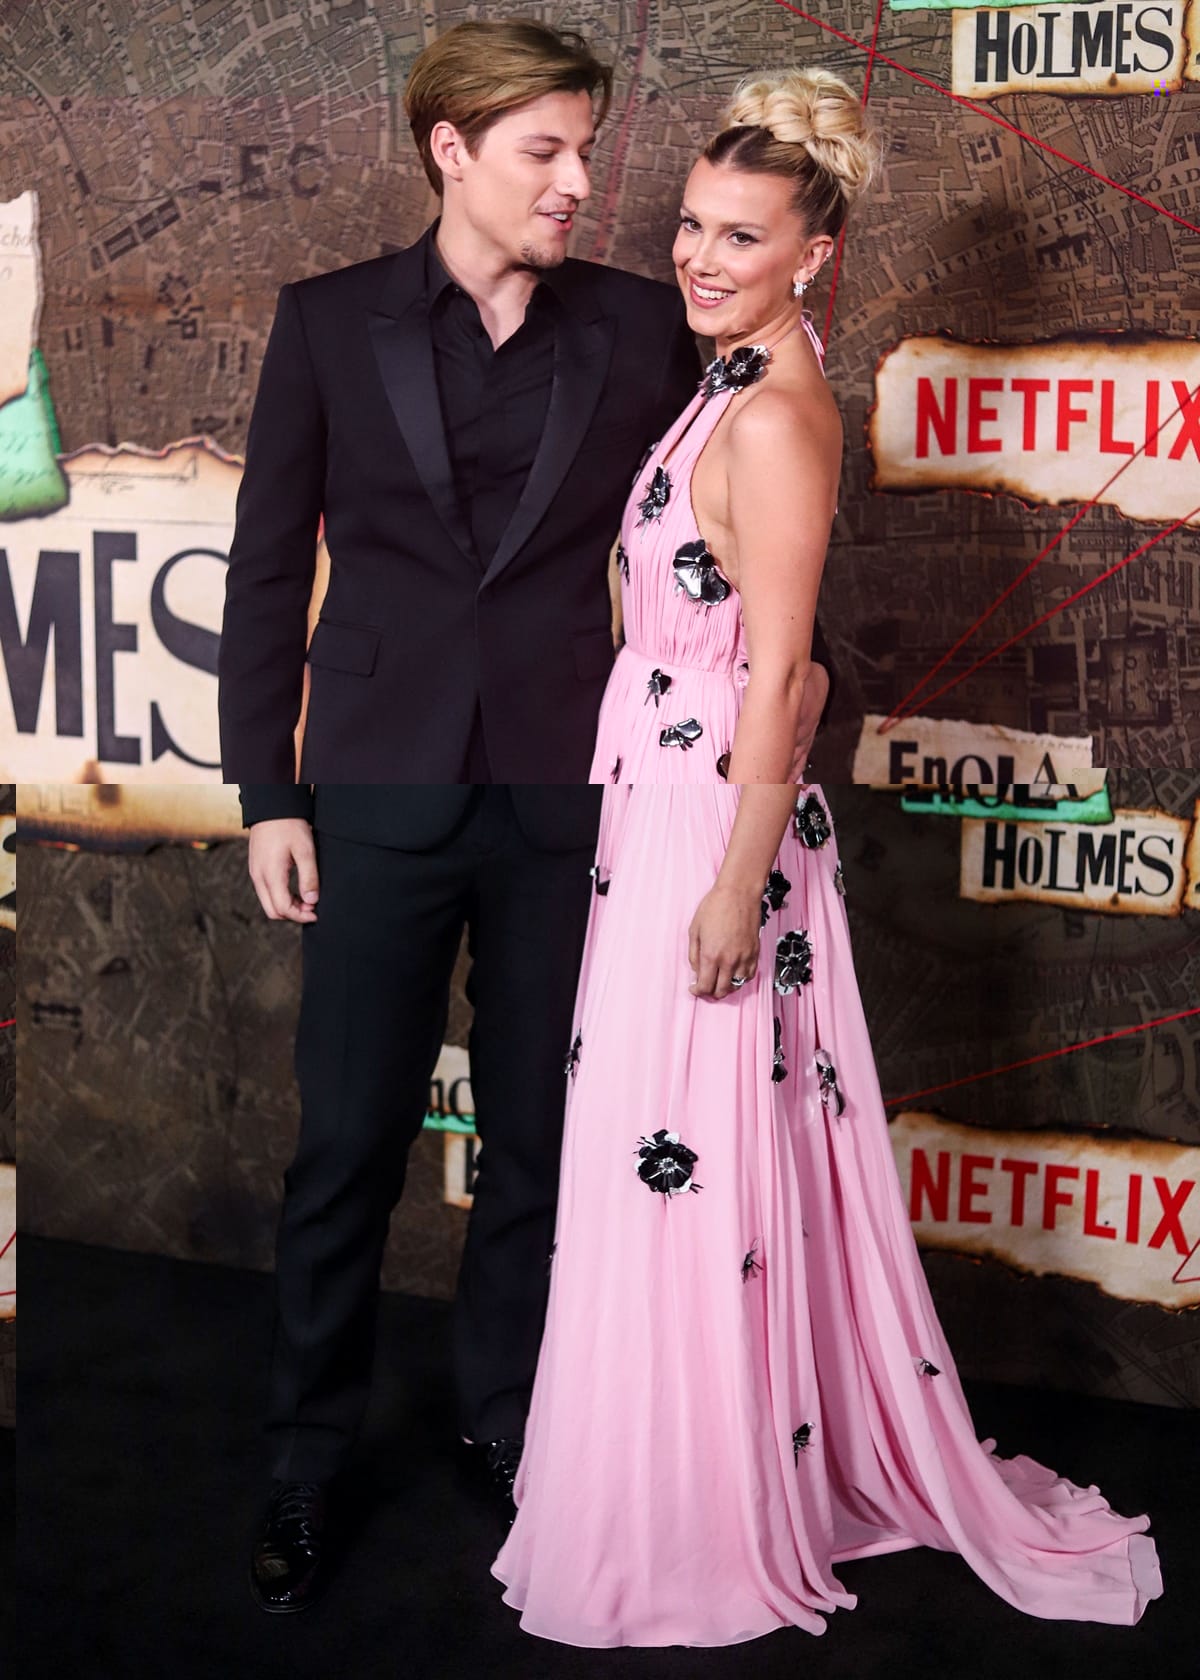 Jake Bongiovi with his girlfriend Millie Bobby Brown in a gorgeous plunging pink Louis Vuitton gown at the world premiere of Netflix's "Enola Holmes 2"